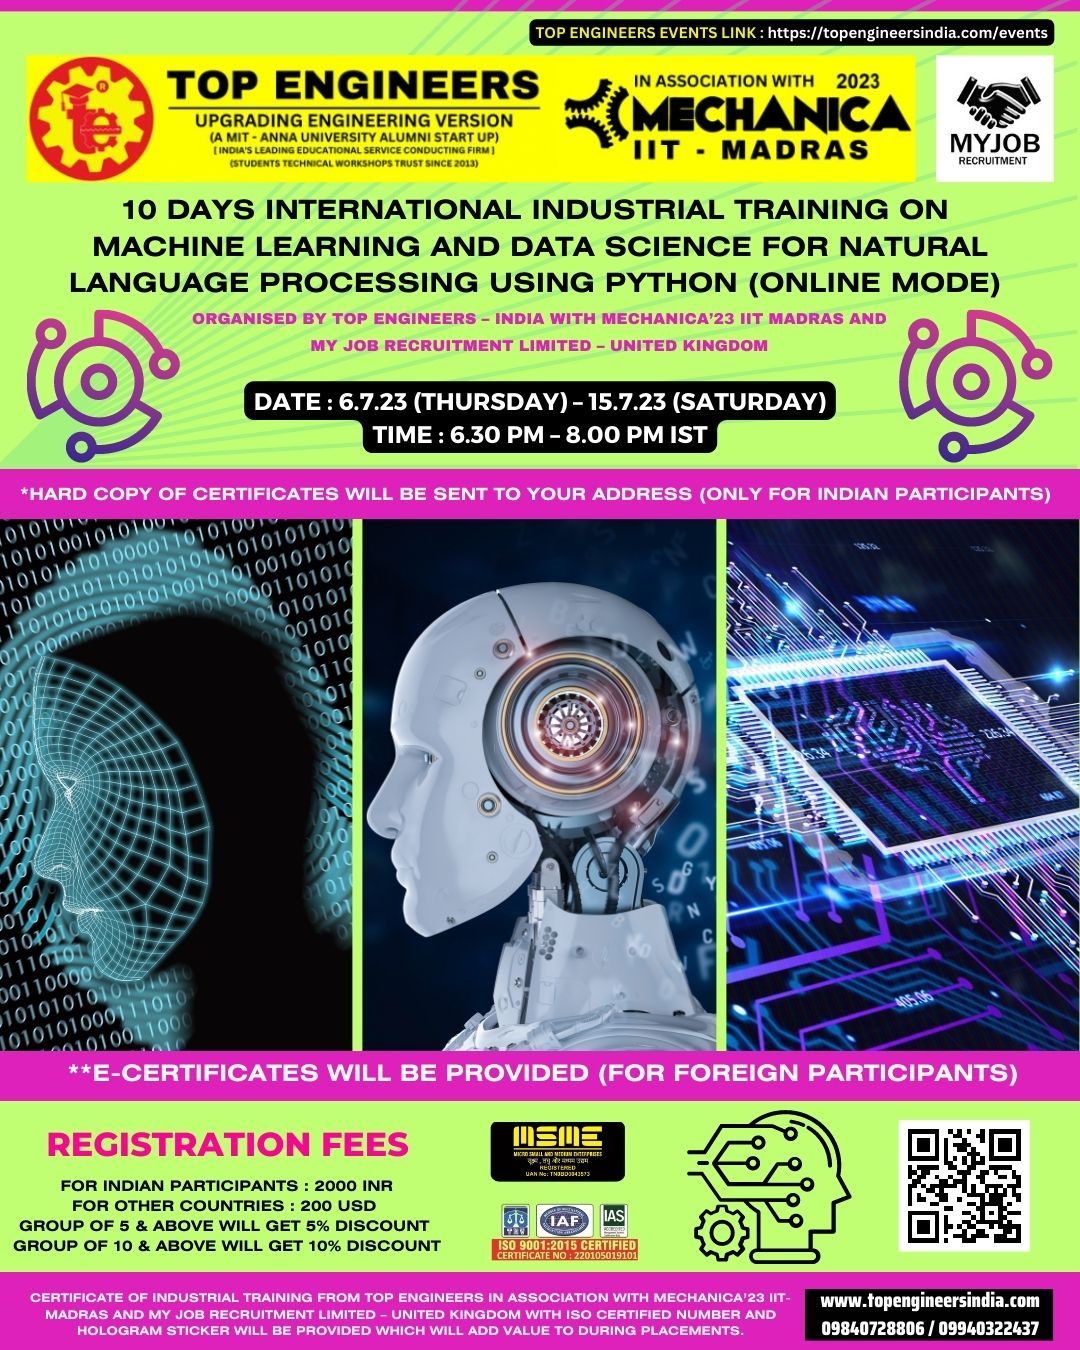 10 Days International Industrial Training on Machine Learning and Data Science for Natural Language Processing using Python (online Mode) 2023